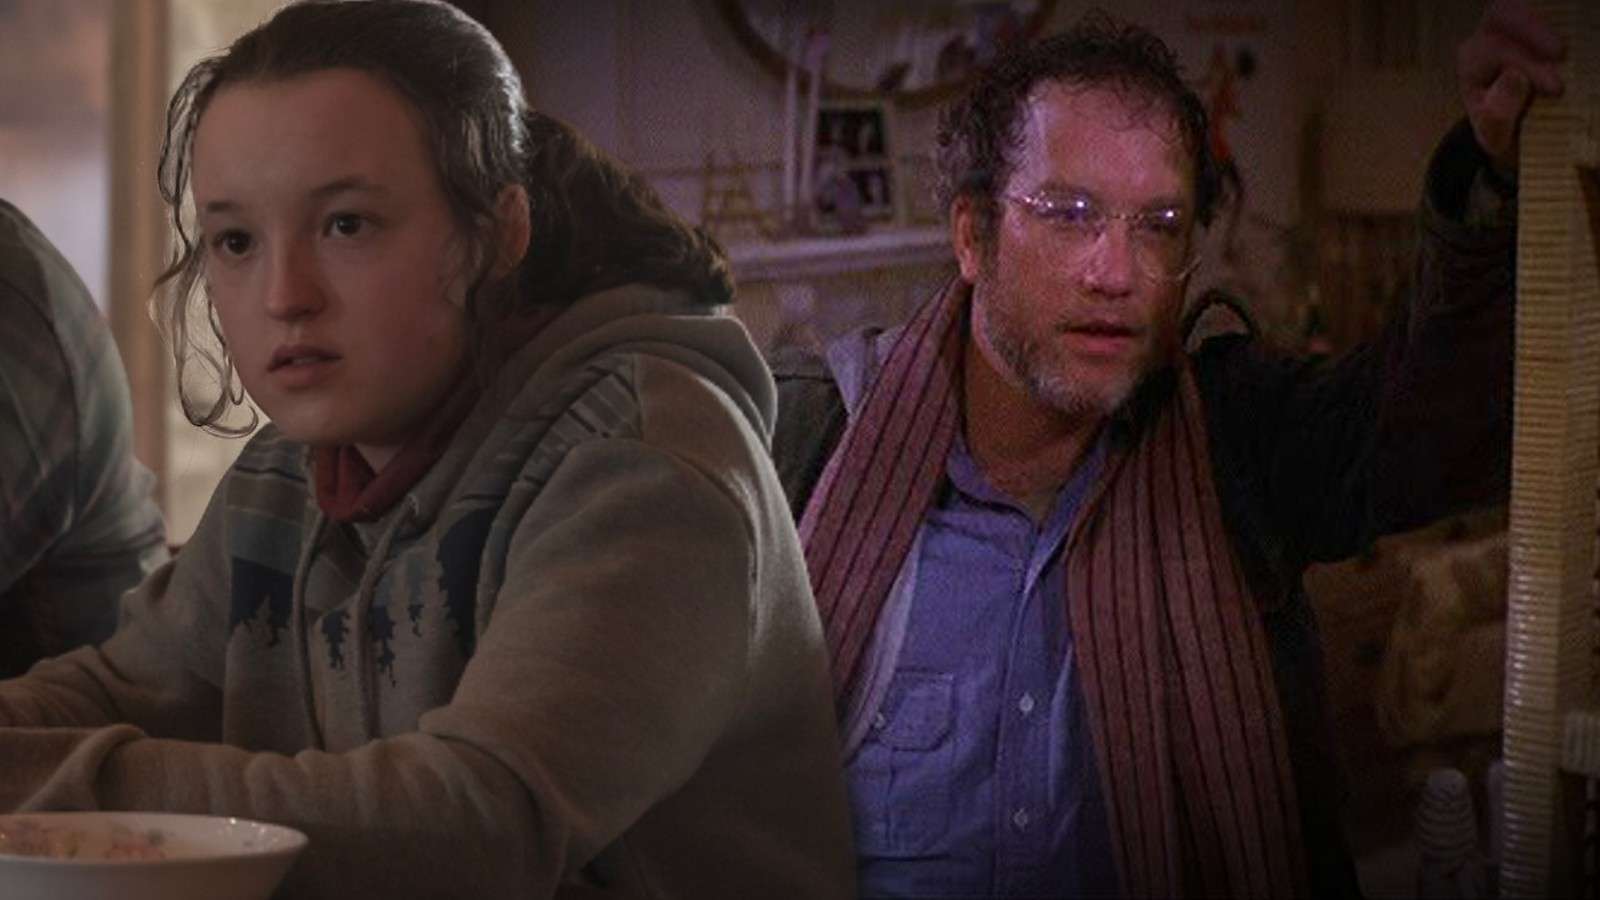 Ellie in The Last of Us Episode 6 and a still from The Goodbye Girl